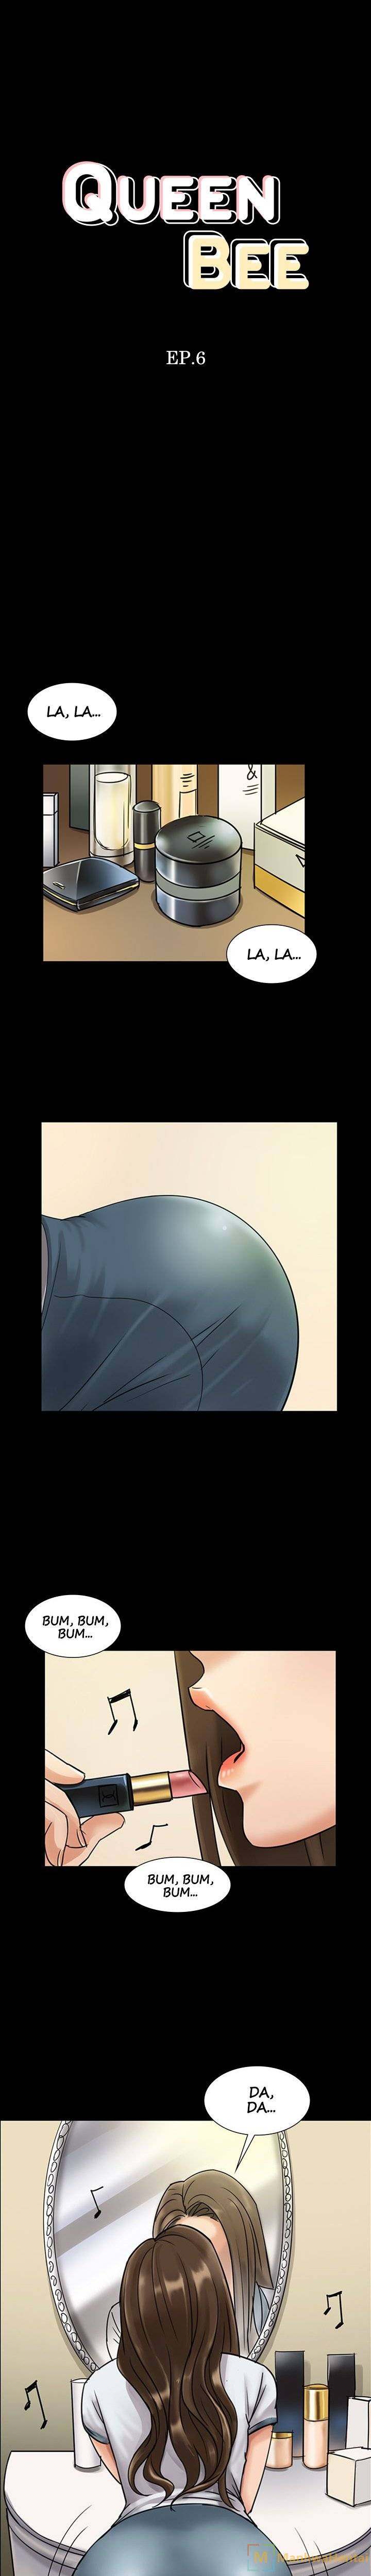 Panel Image 1 for chapter 6 of manhwa Queen Bee on read.oppai.stream